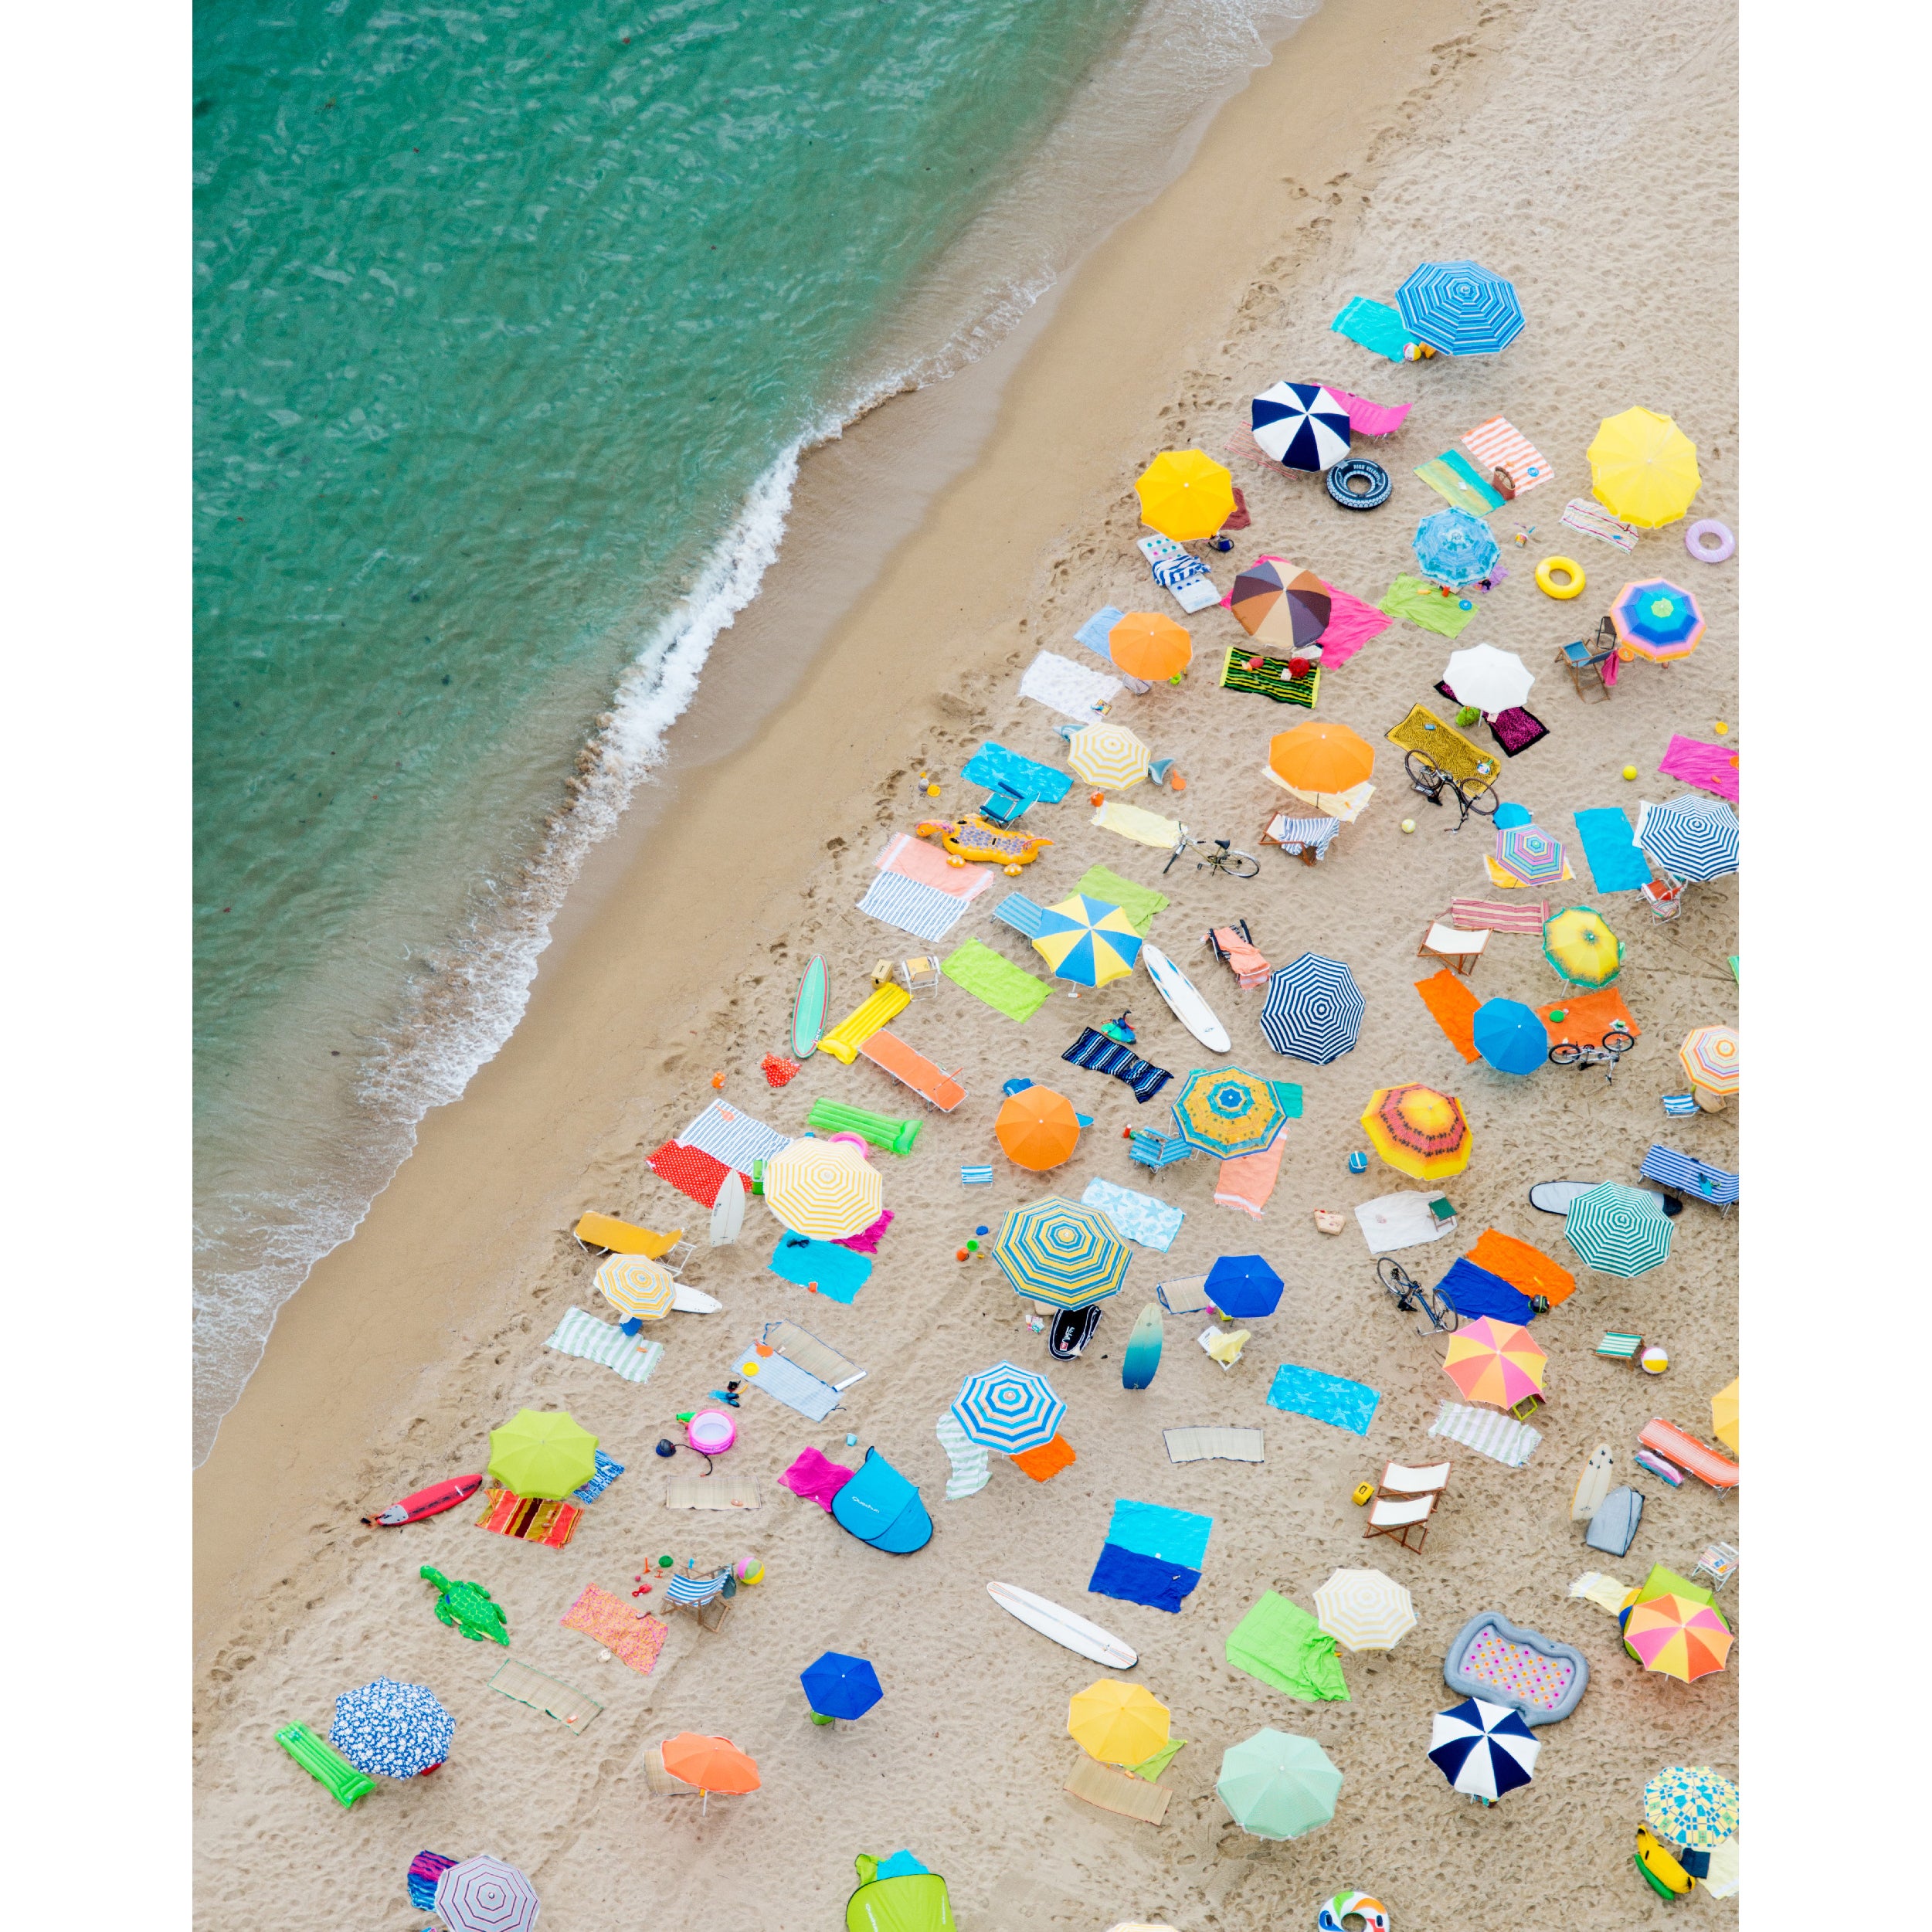 17 Breathtaking Aerial Beach Photos That Will Make You Want to Travel Right Now